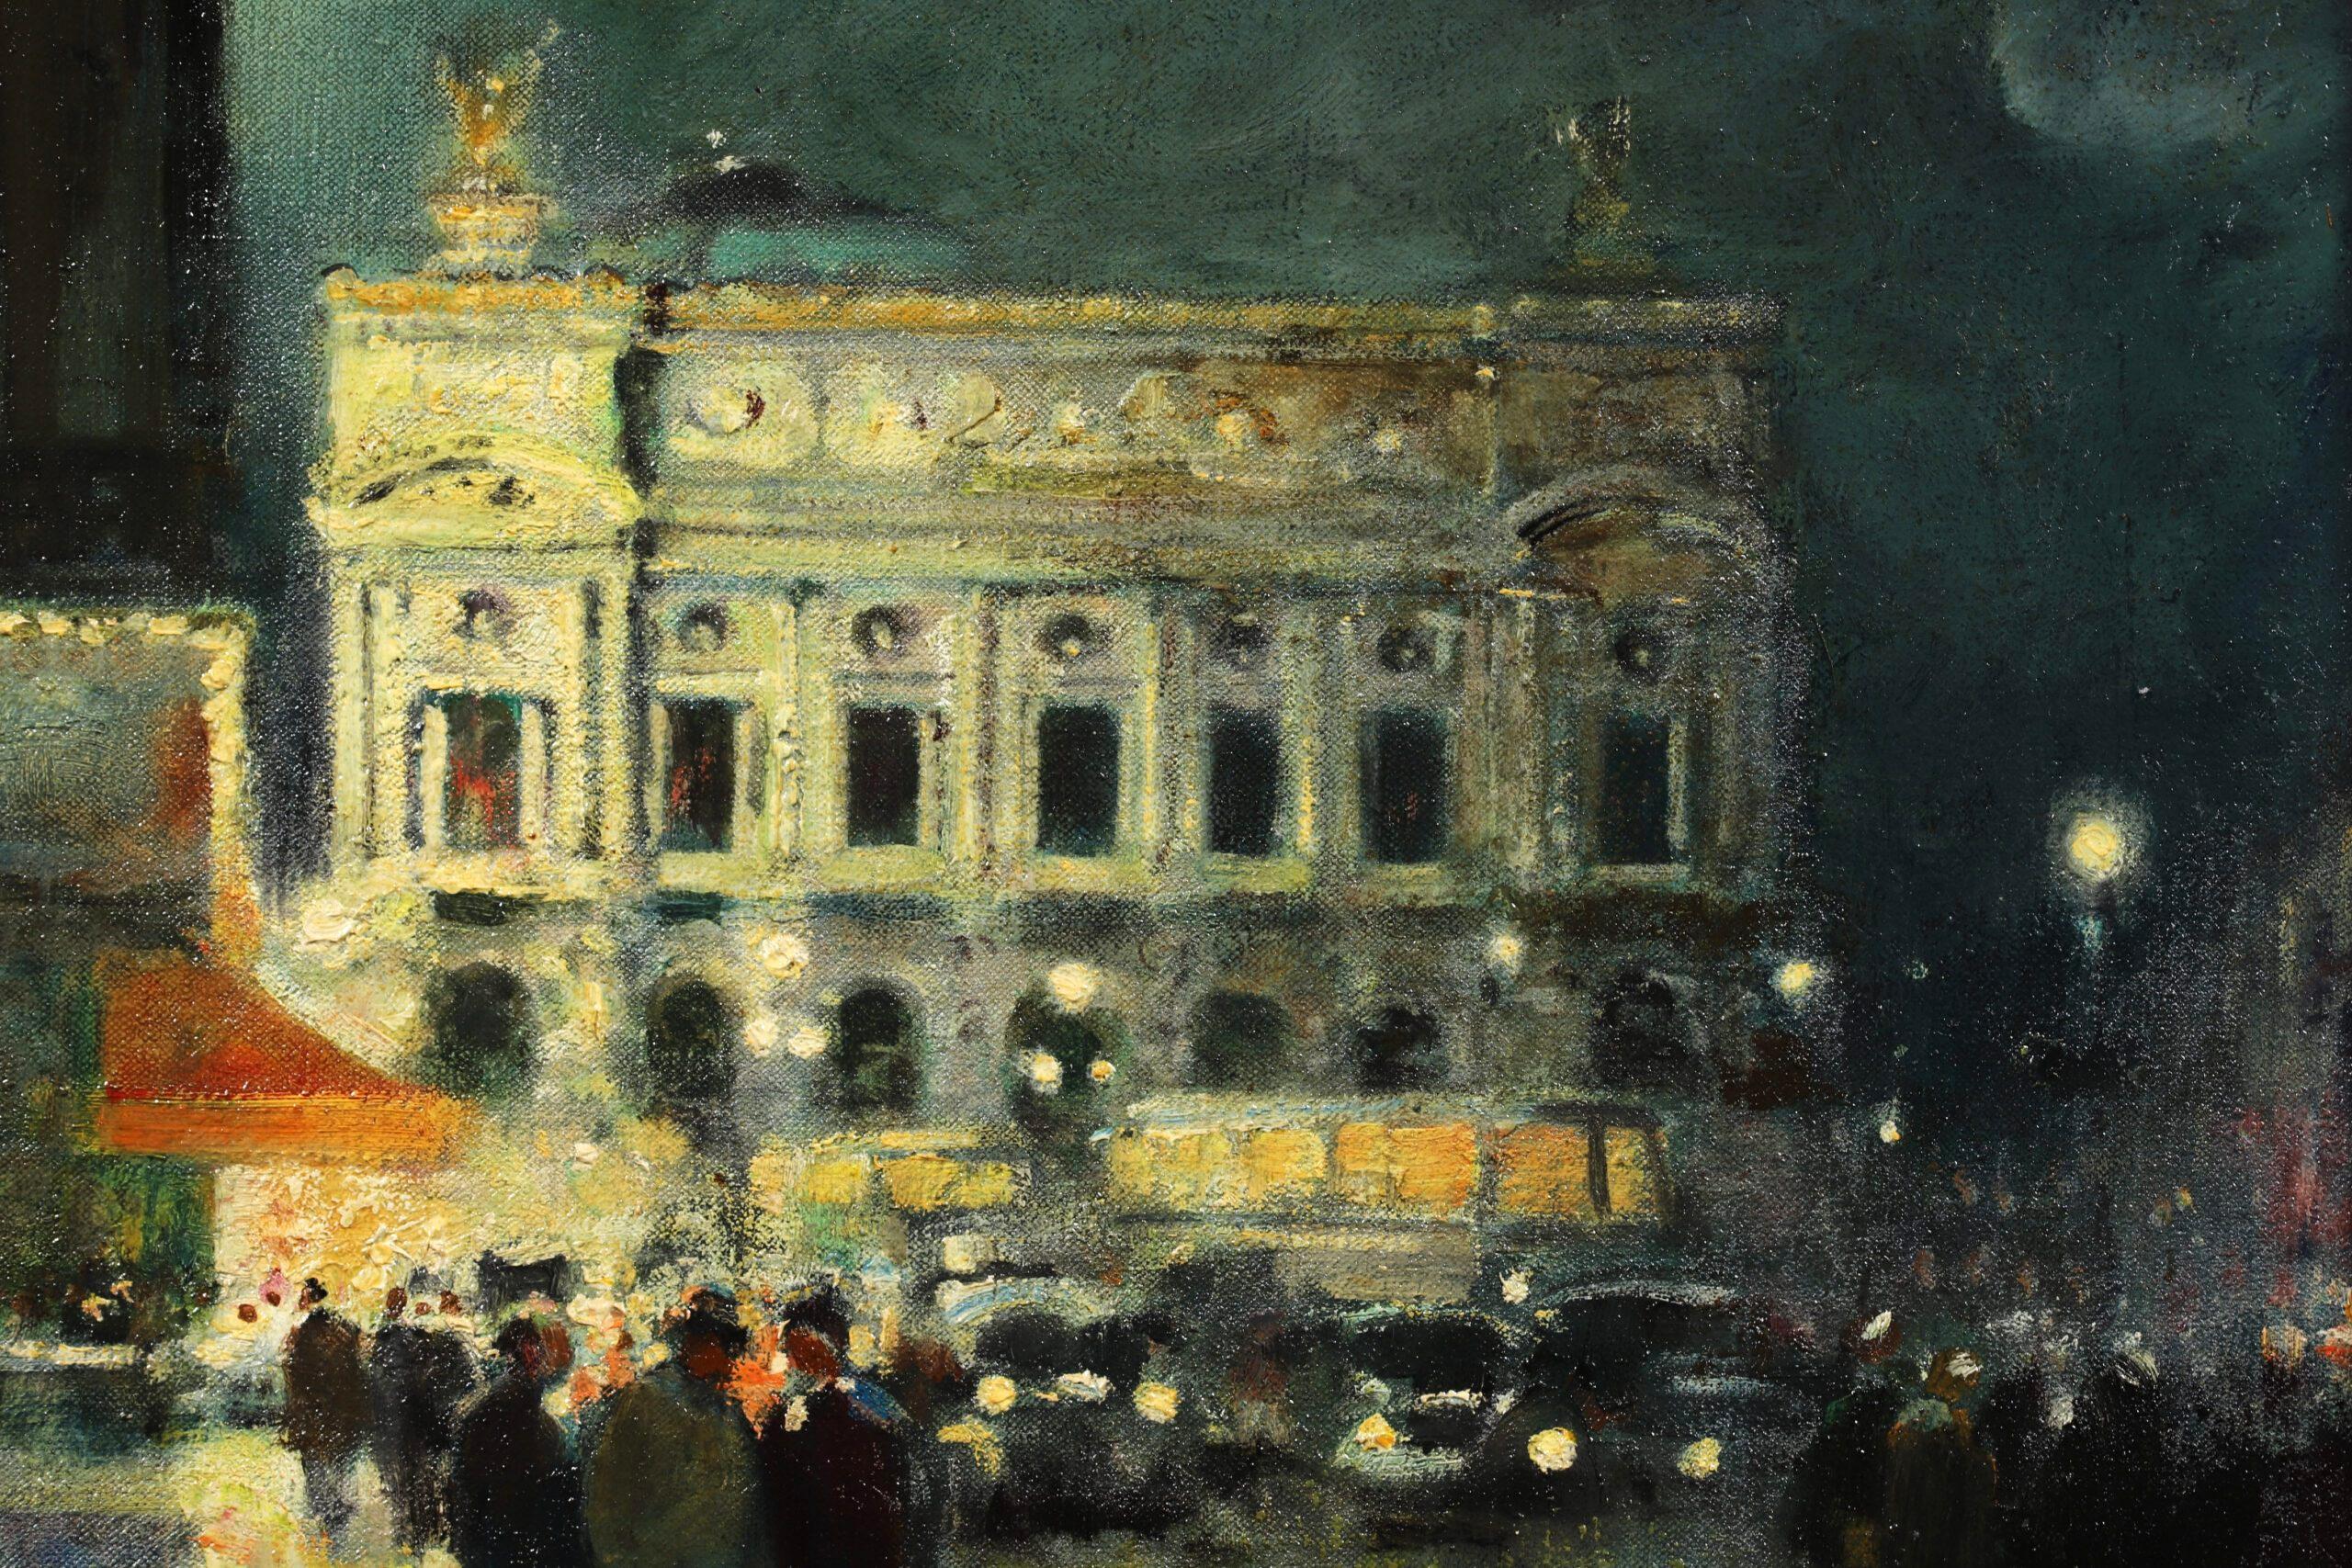 Signed impressionist figures in cityscape oil on canvas circa 1940 by French painter Jules Rene Herve. This nighttime piece has three gentlemen in the foreground standing on a pavement in The Place de l'Opera square in Paris, France beside a flower